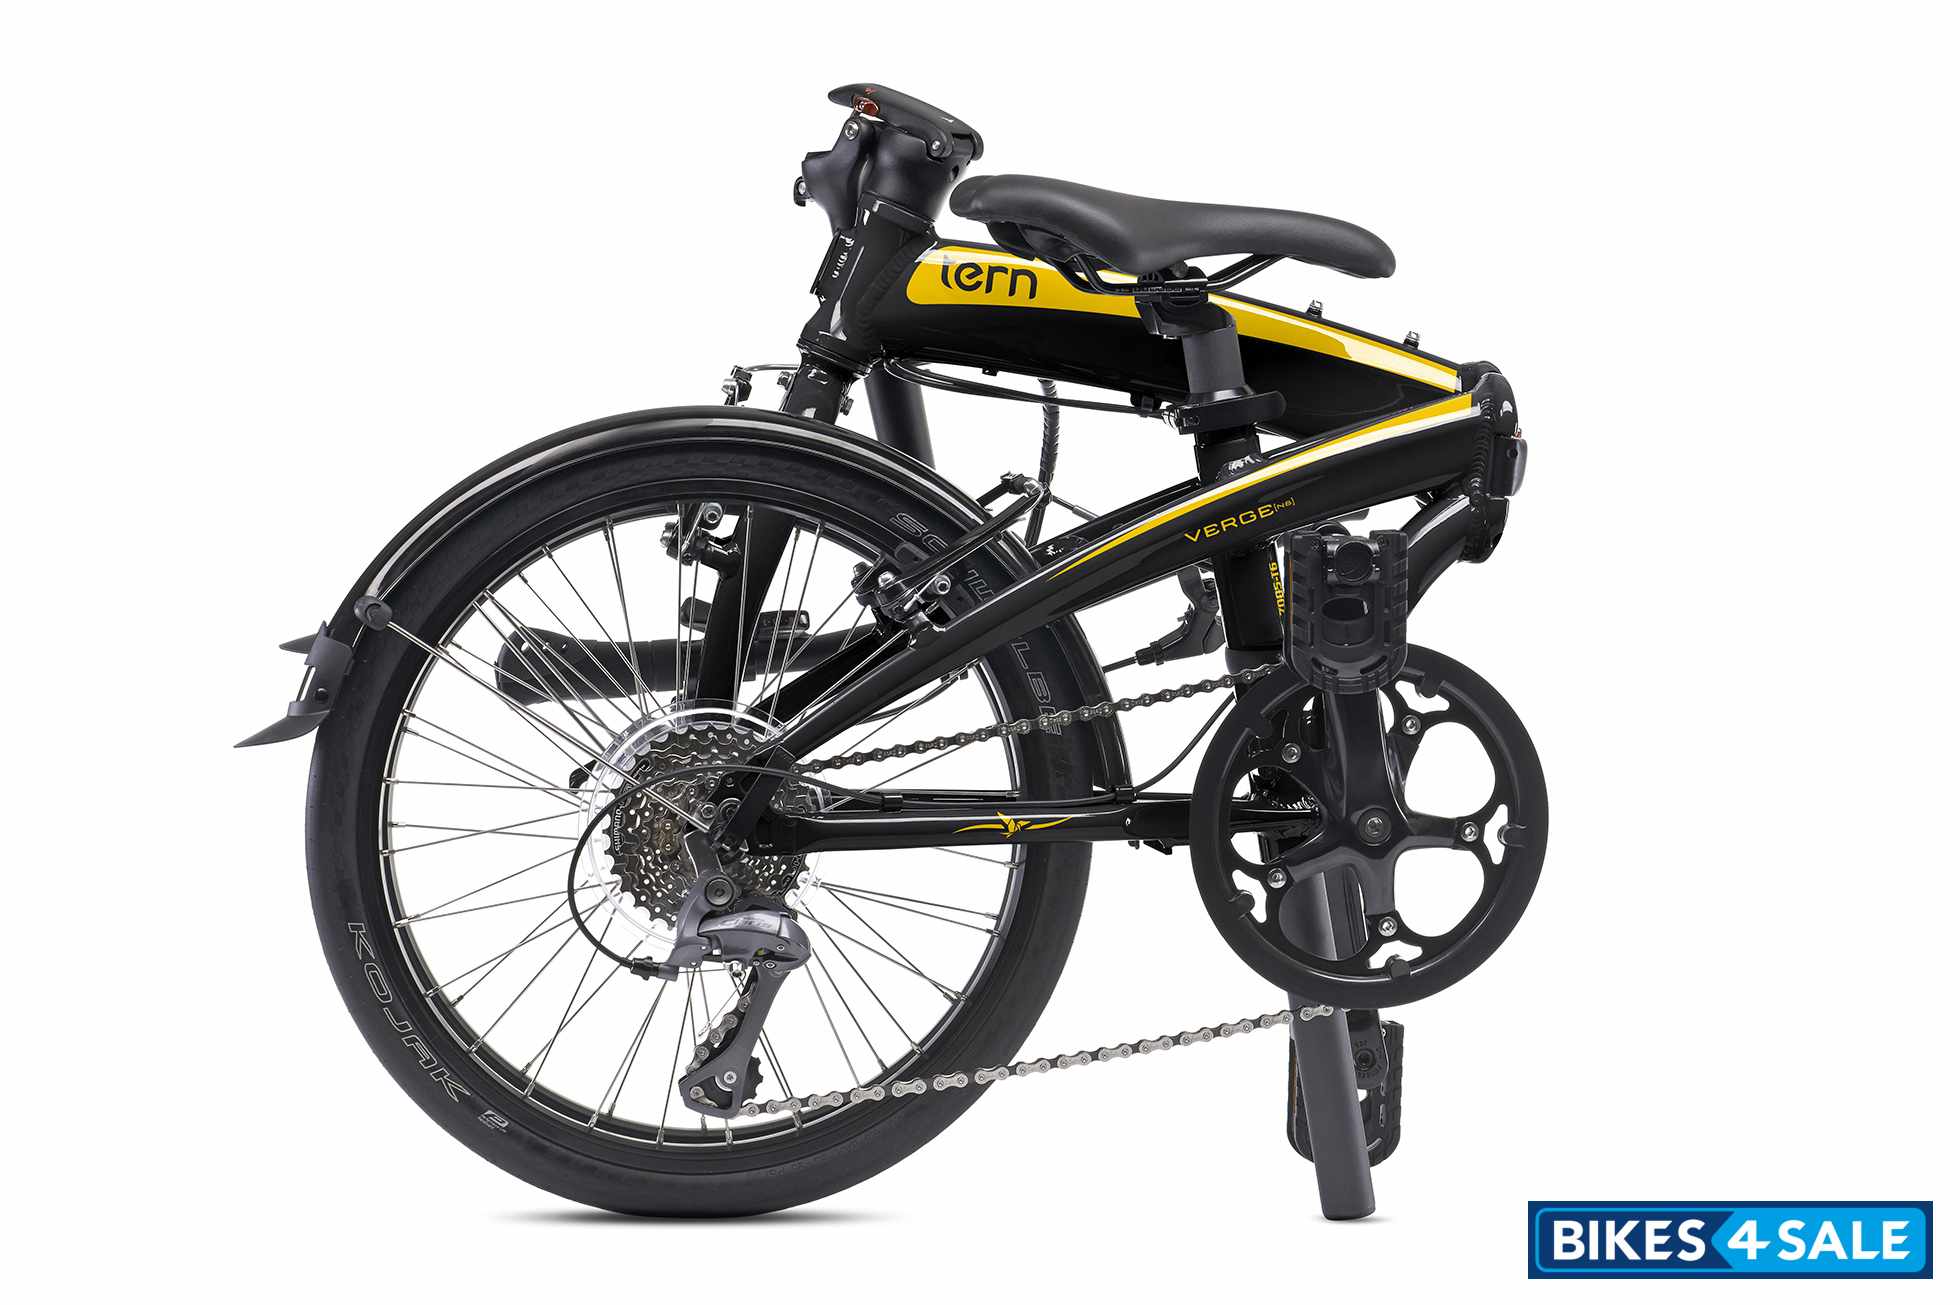 Tern Verge N8 Bicycle: Price, Review, Specs and Features - Bikes4Sale